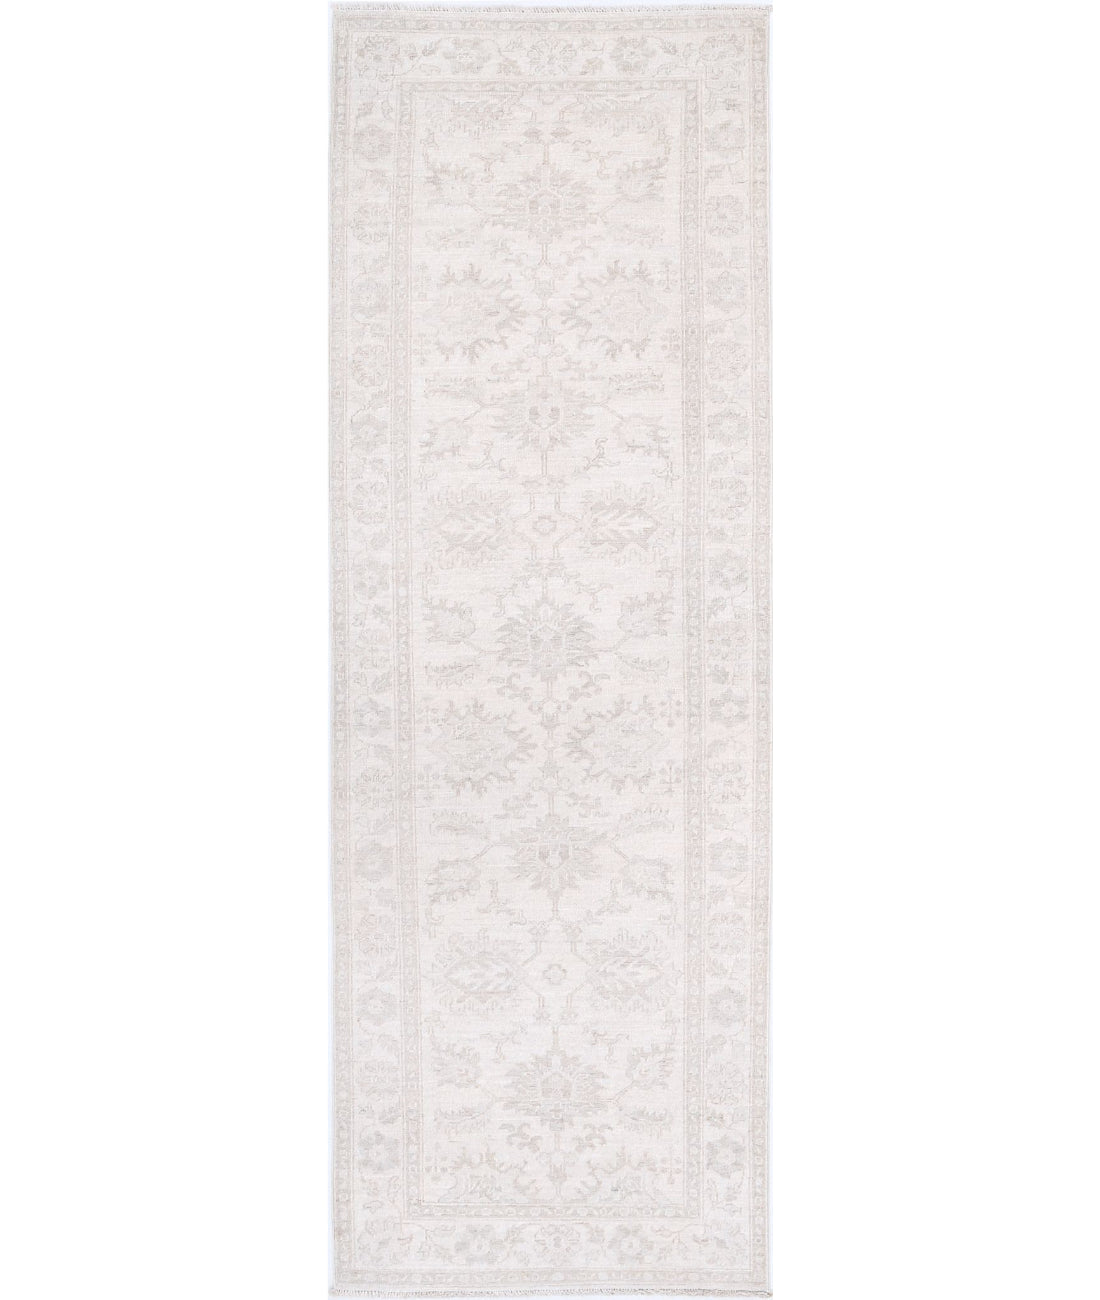 Hand Knotted Serenity Wool Rug - 2'6'' x 7'11'' 2'6'' x 7'11'' (75 X 238) / Ivory / Beige